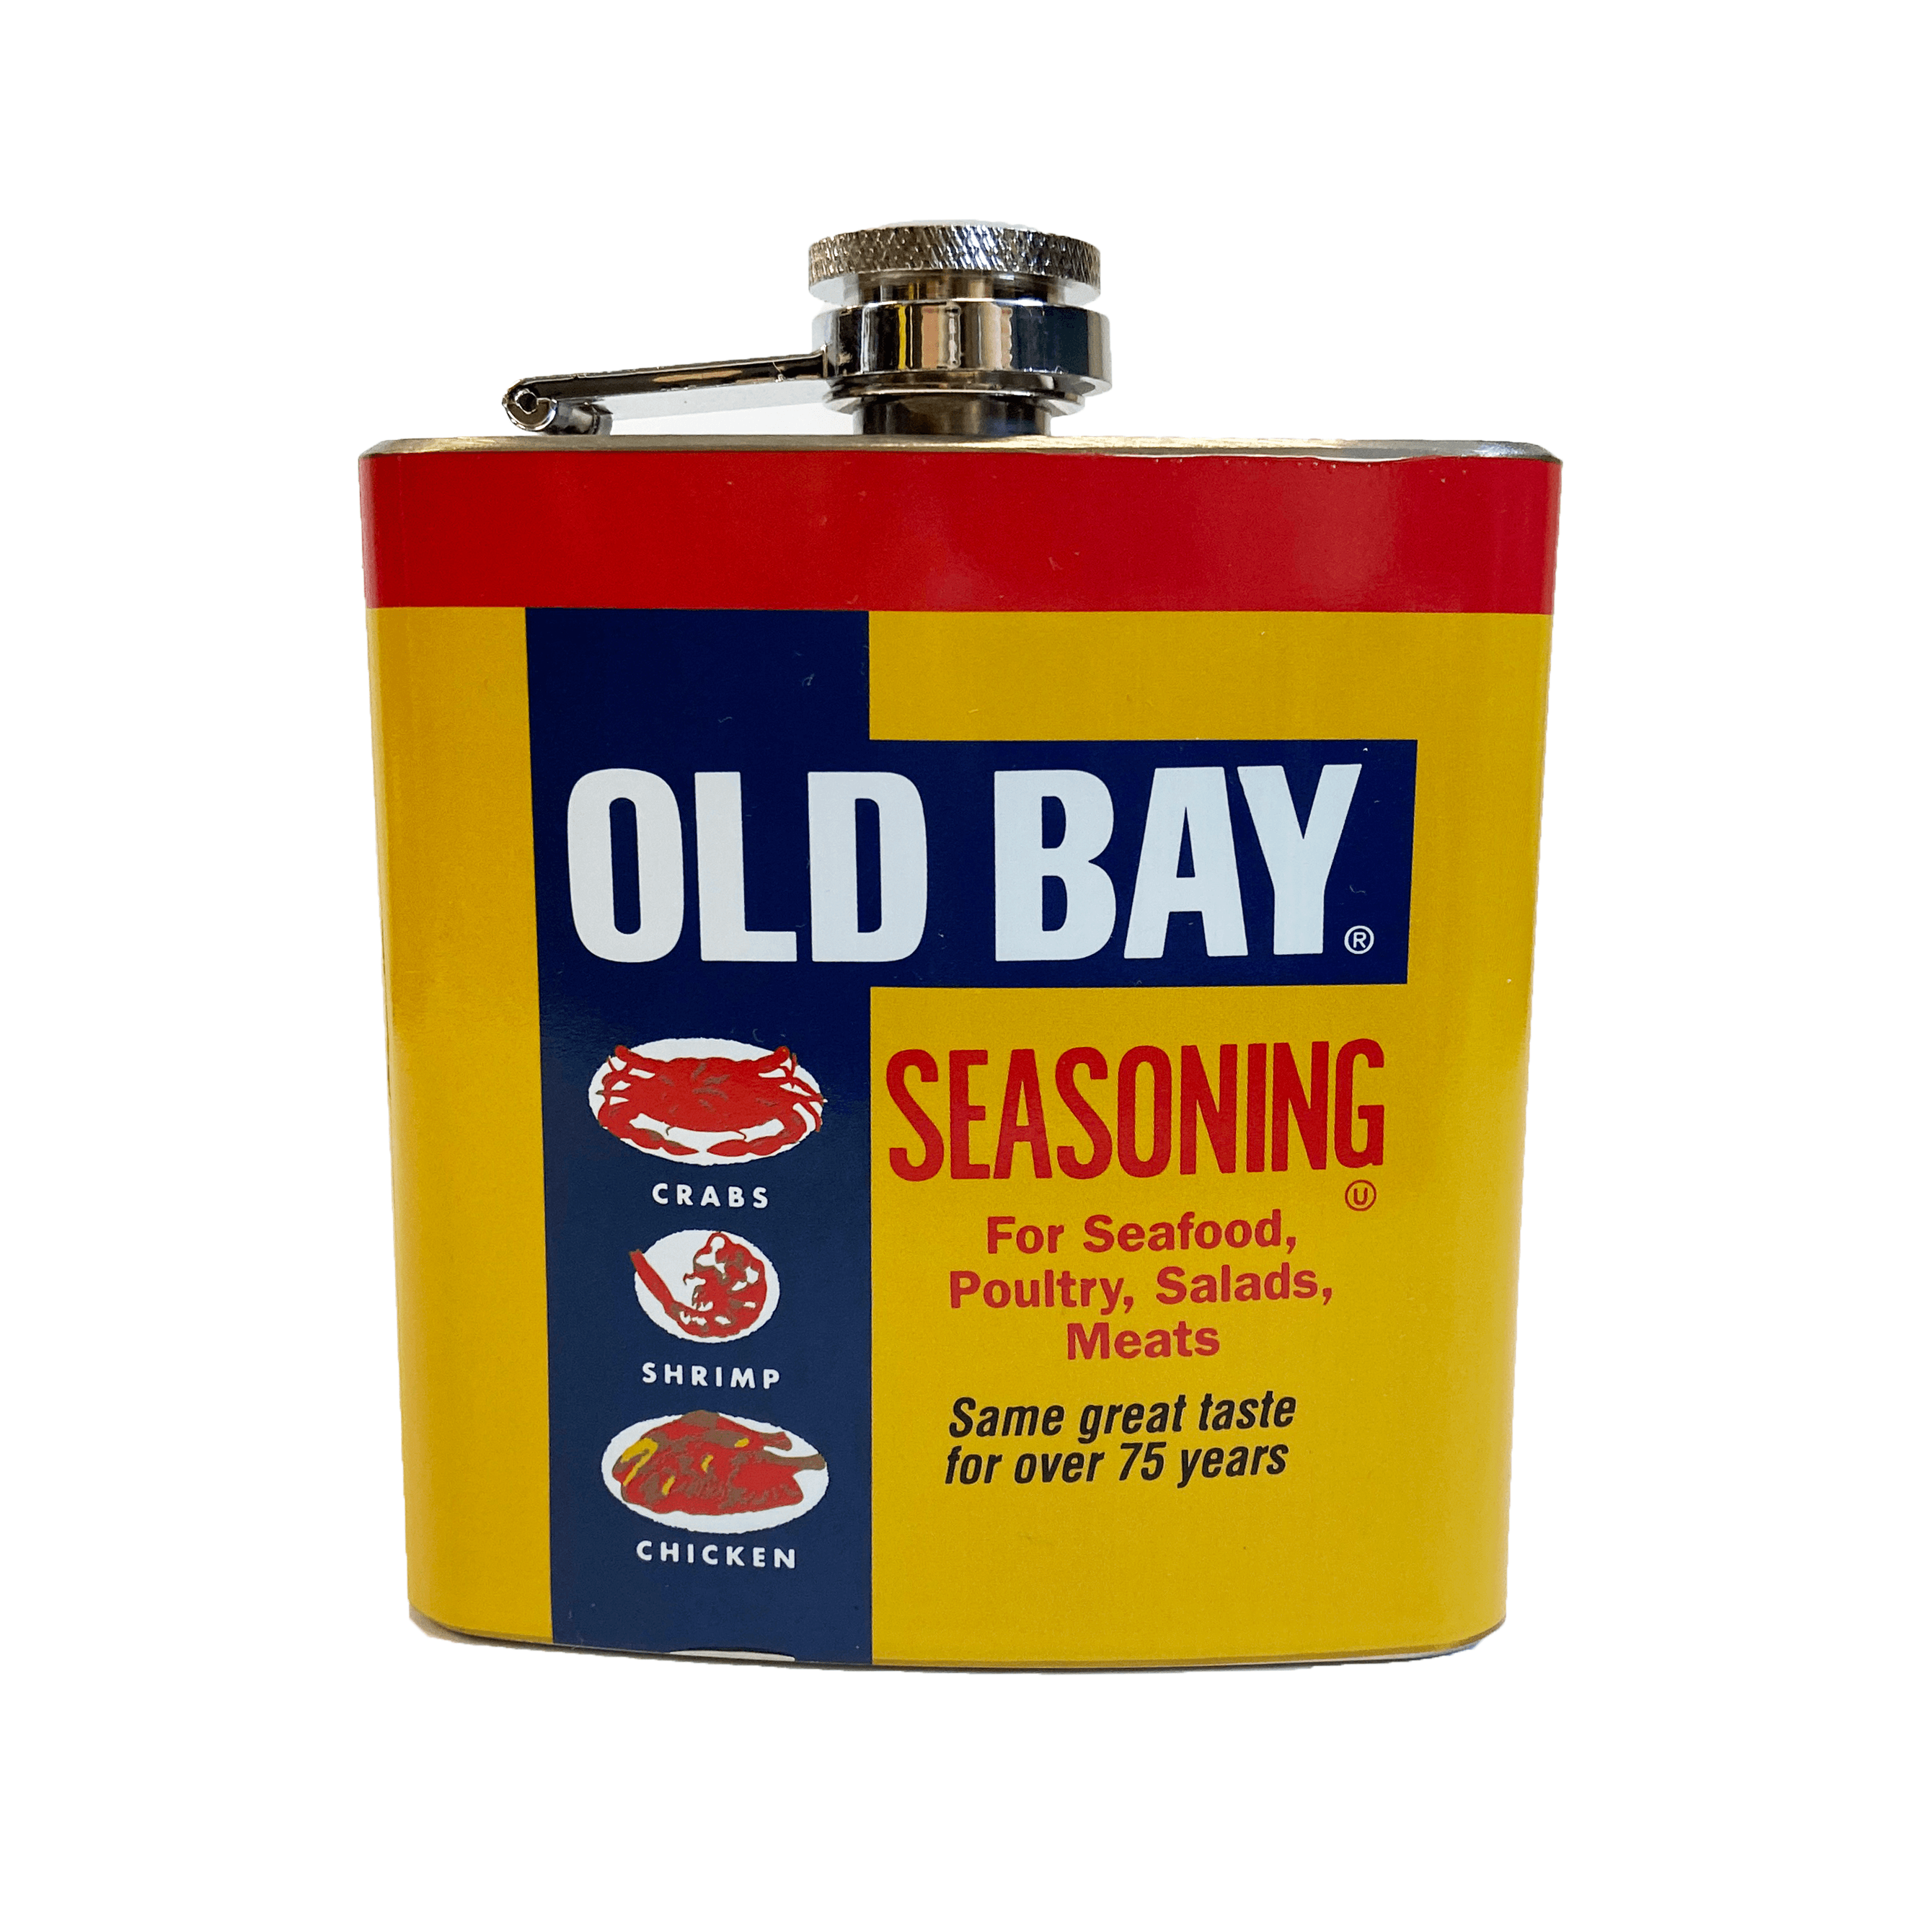 Full Old Bay Can / Flask - Route One Apparel